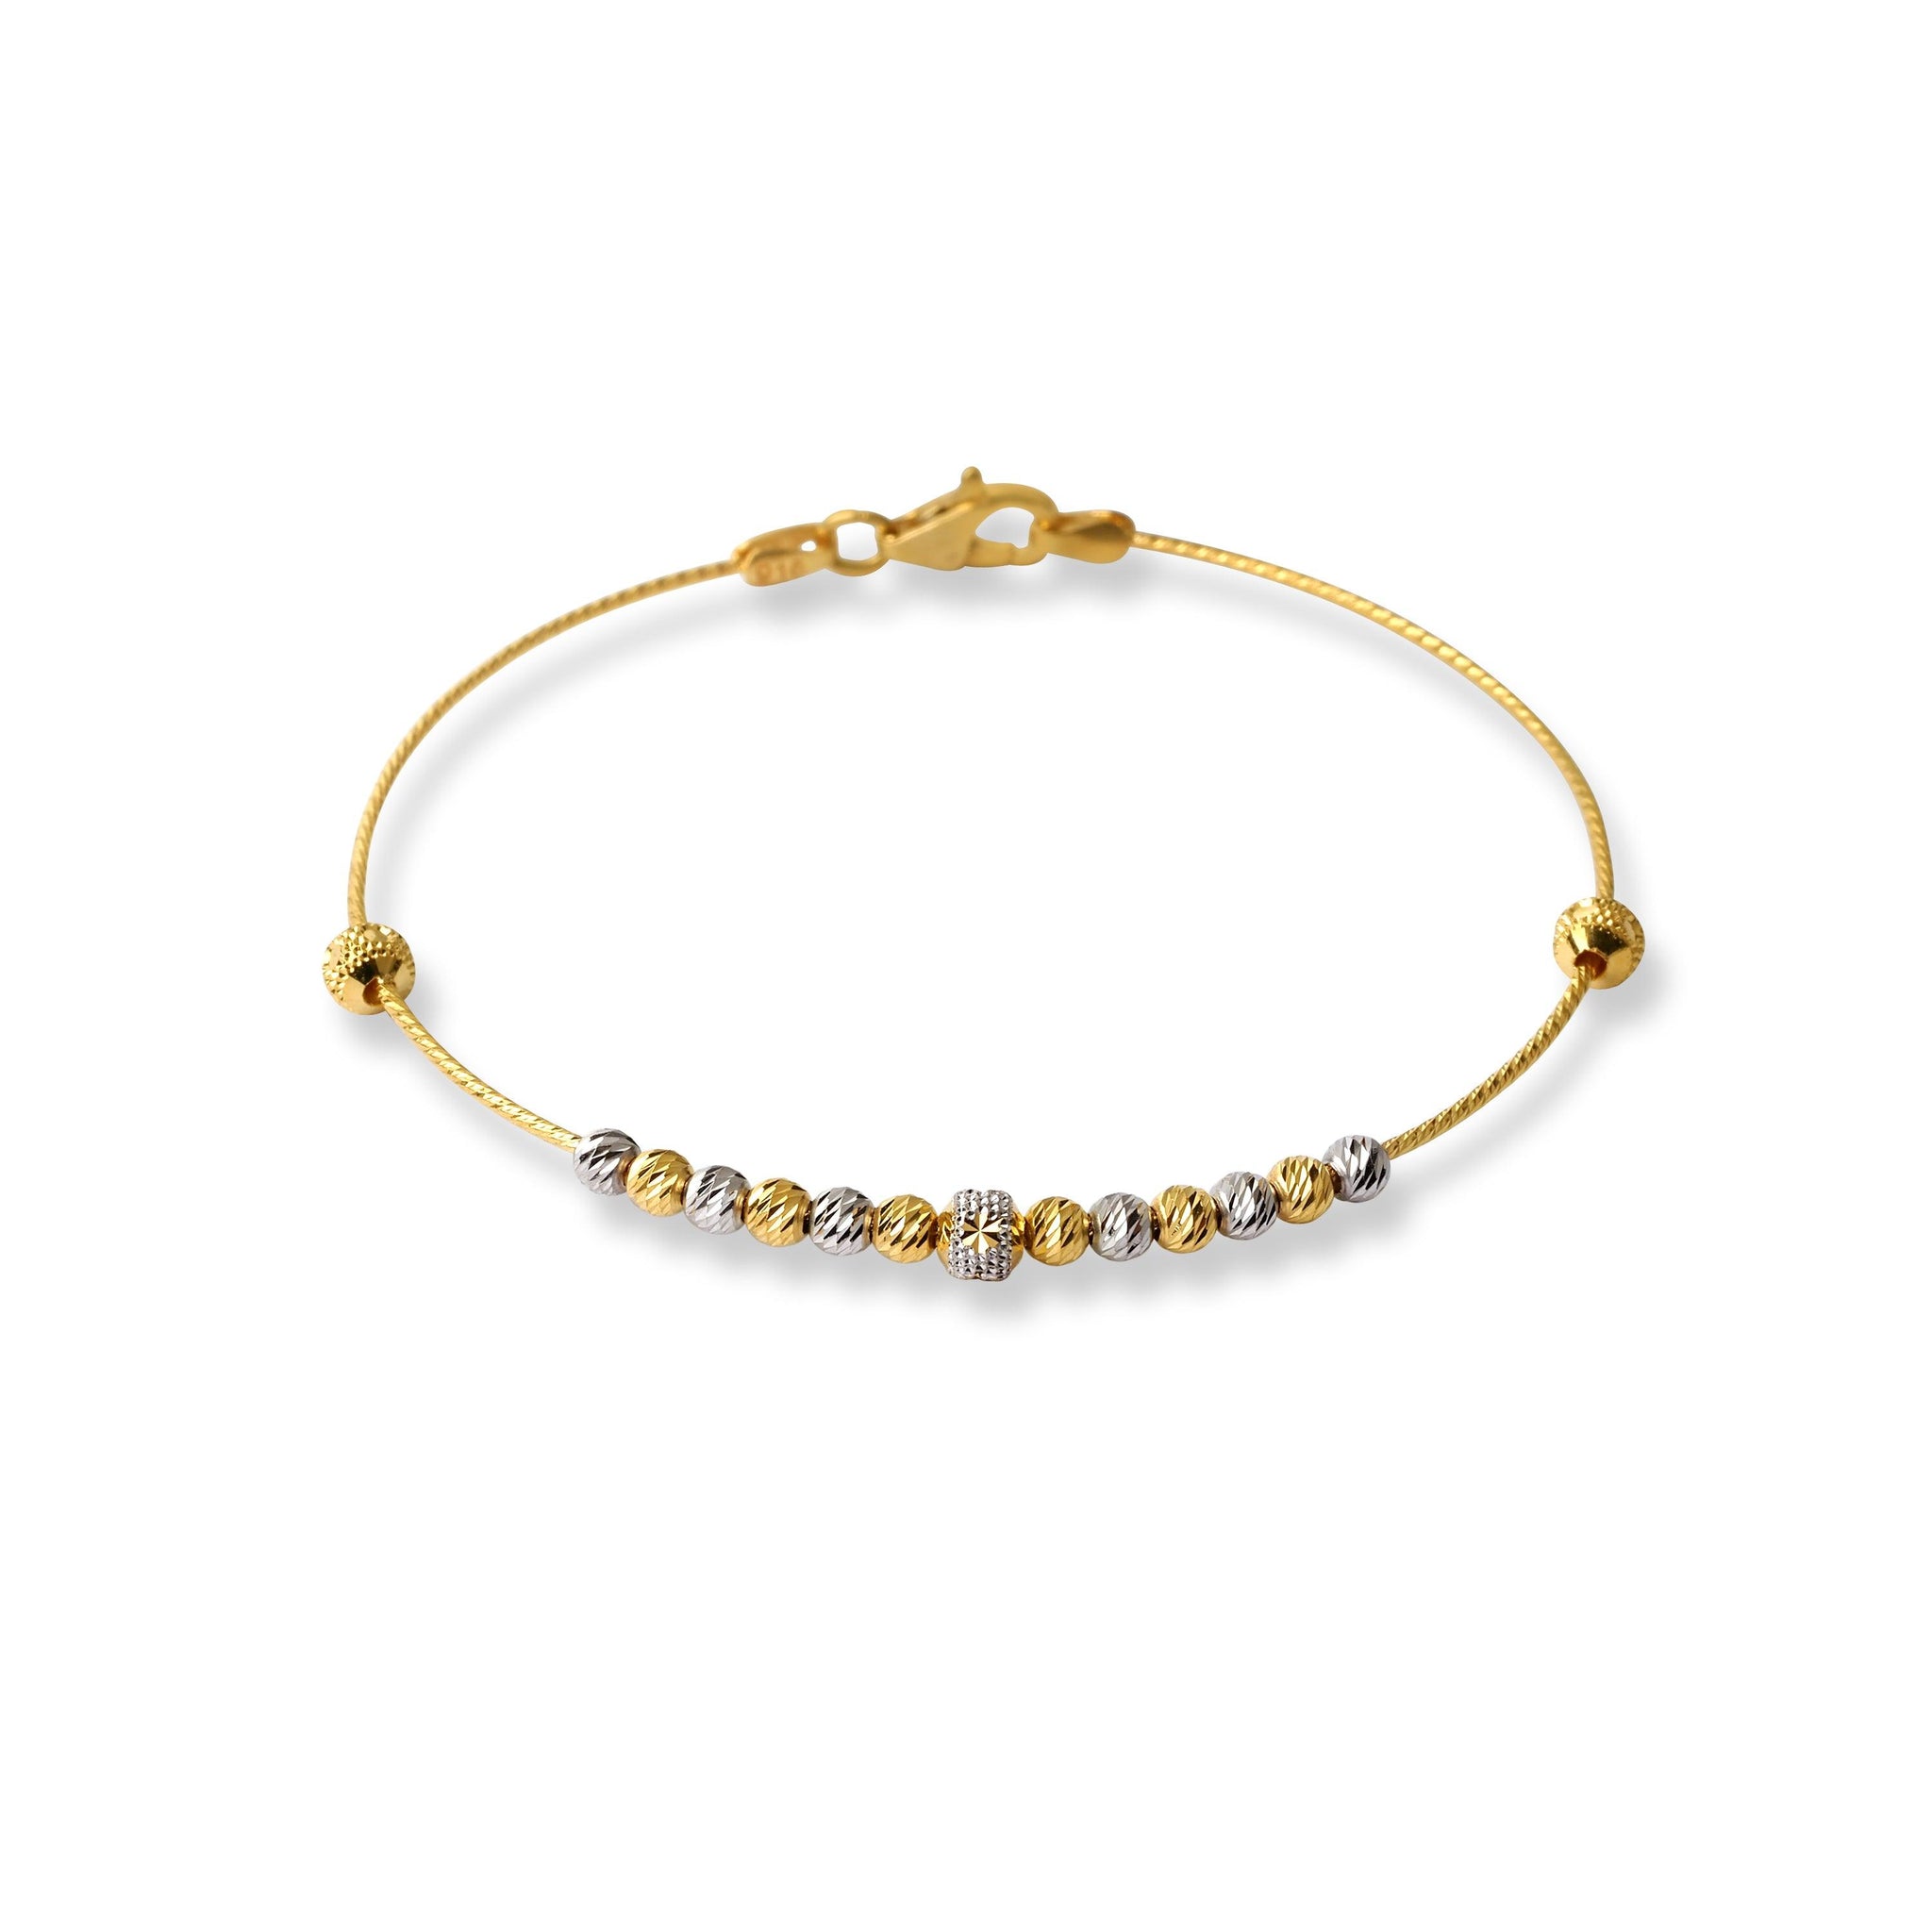 22ct Gold Rhodium Plated Beads Bangle With Rounded Trigger Clasp (4.4g) B-8531